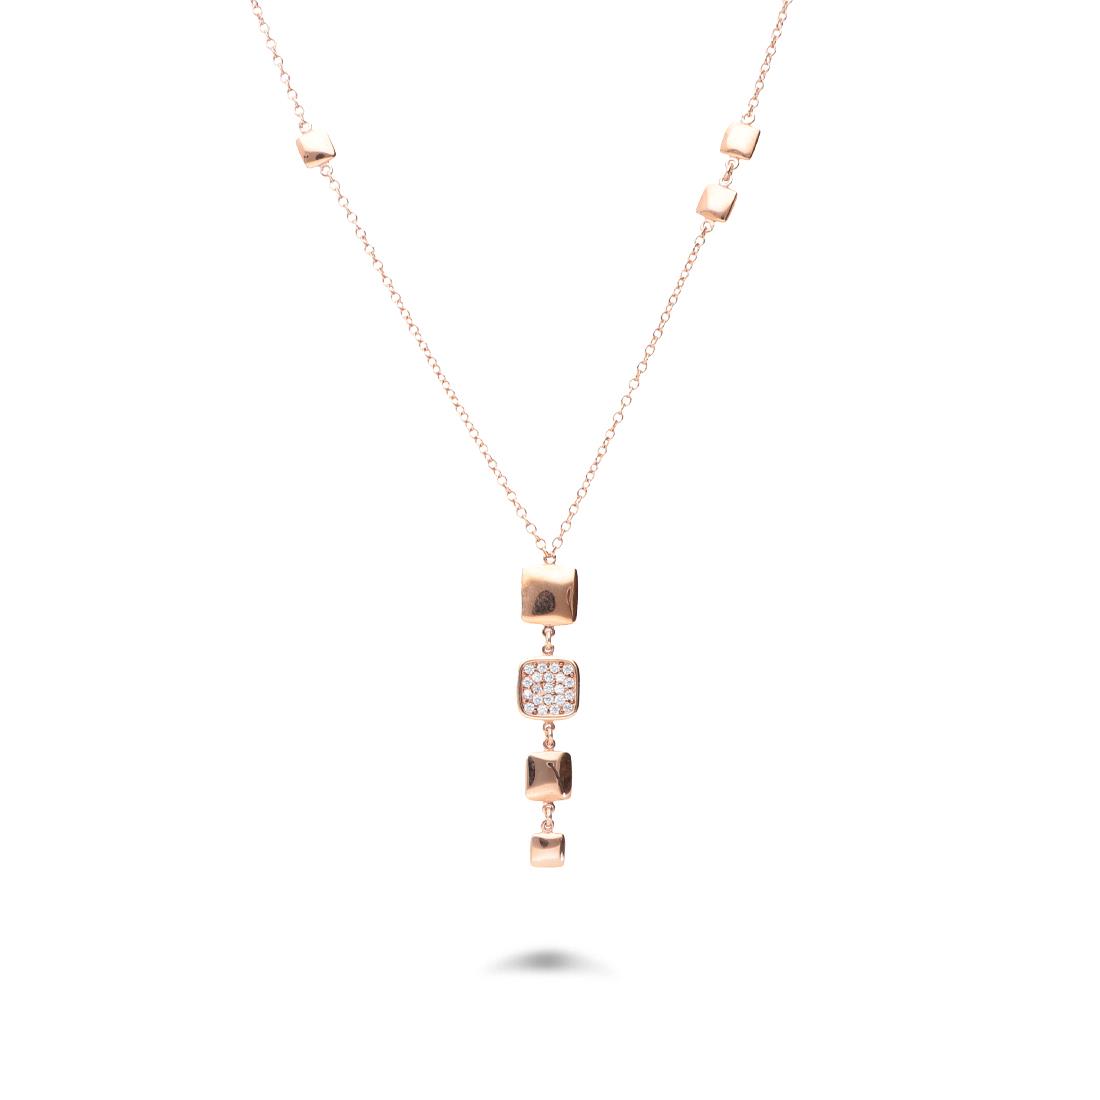 Gold necklace with cubic zirconias - ORO&CO